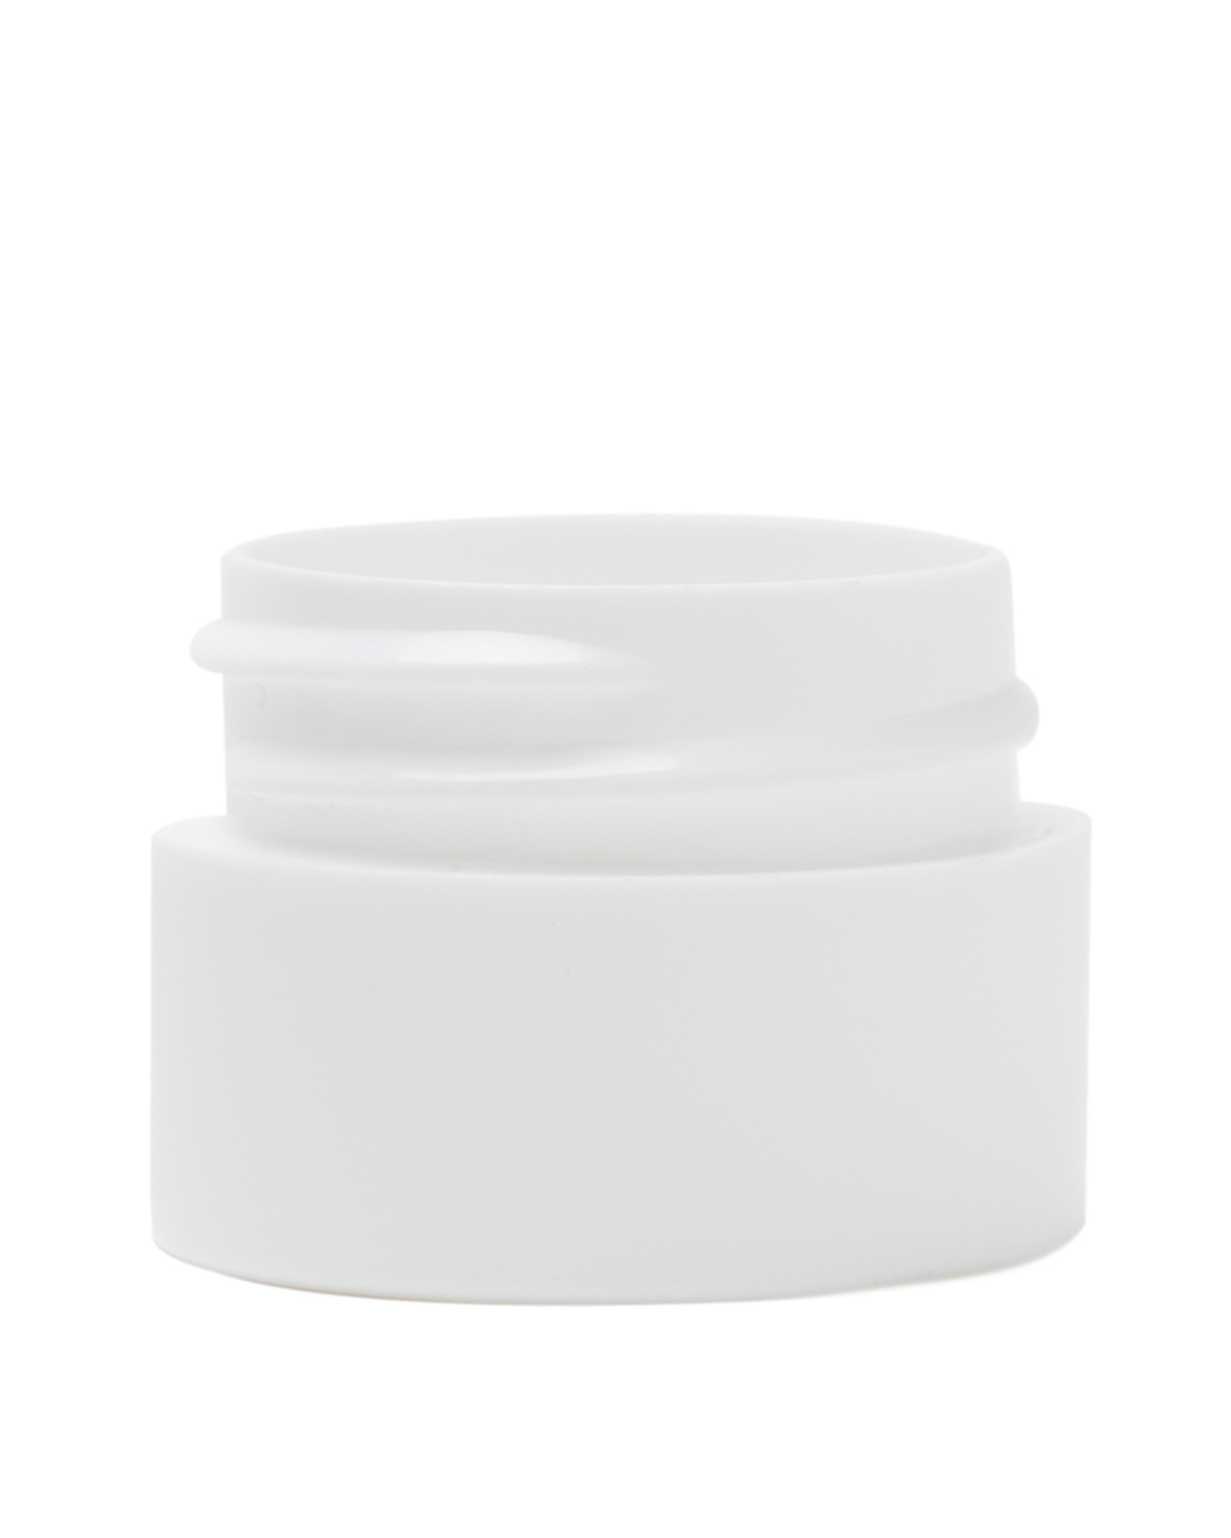 0.25 oz pp white double wall straight base jar 33-400